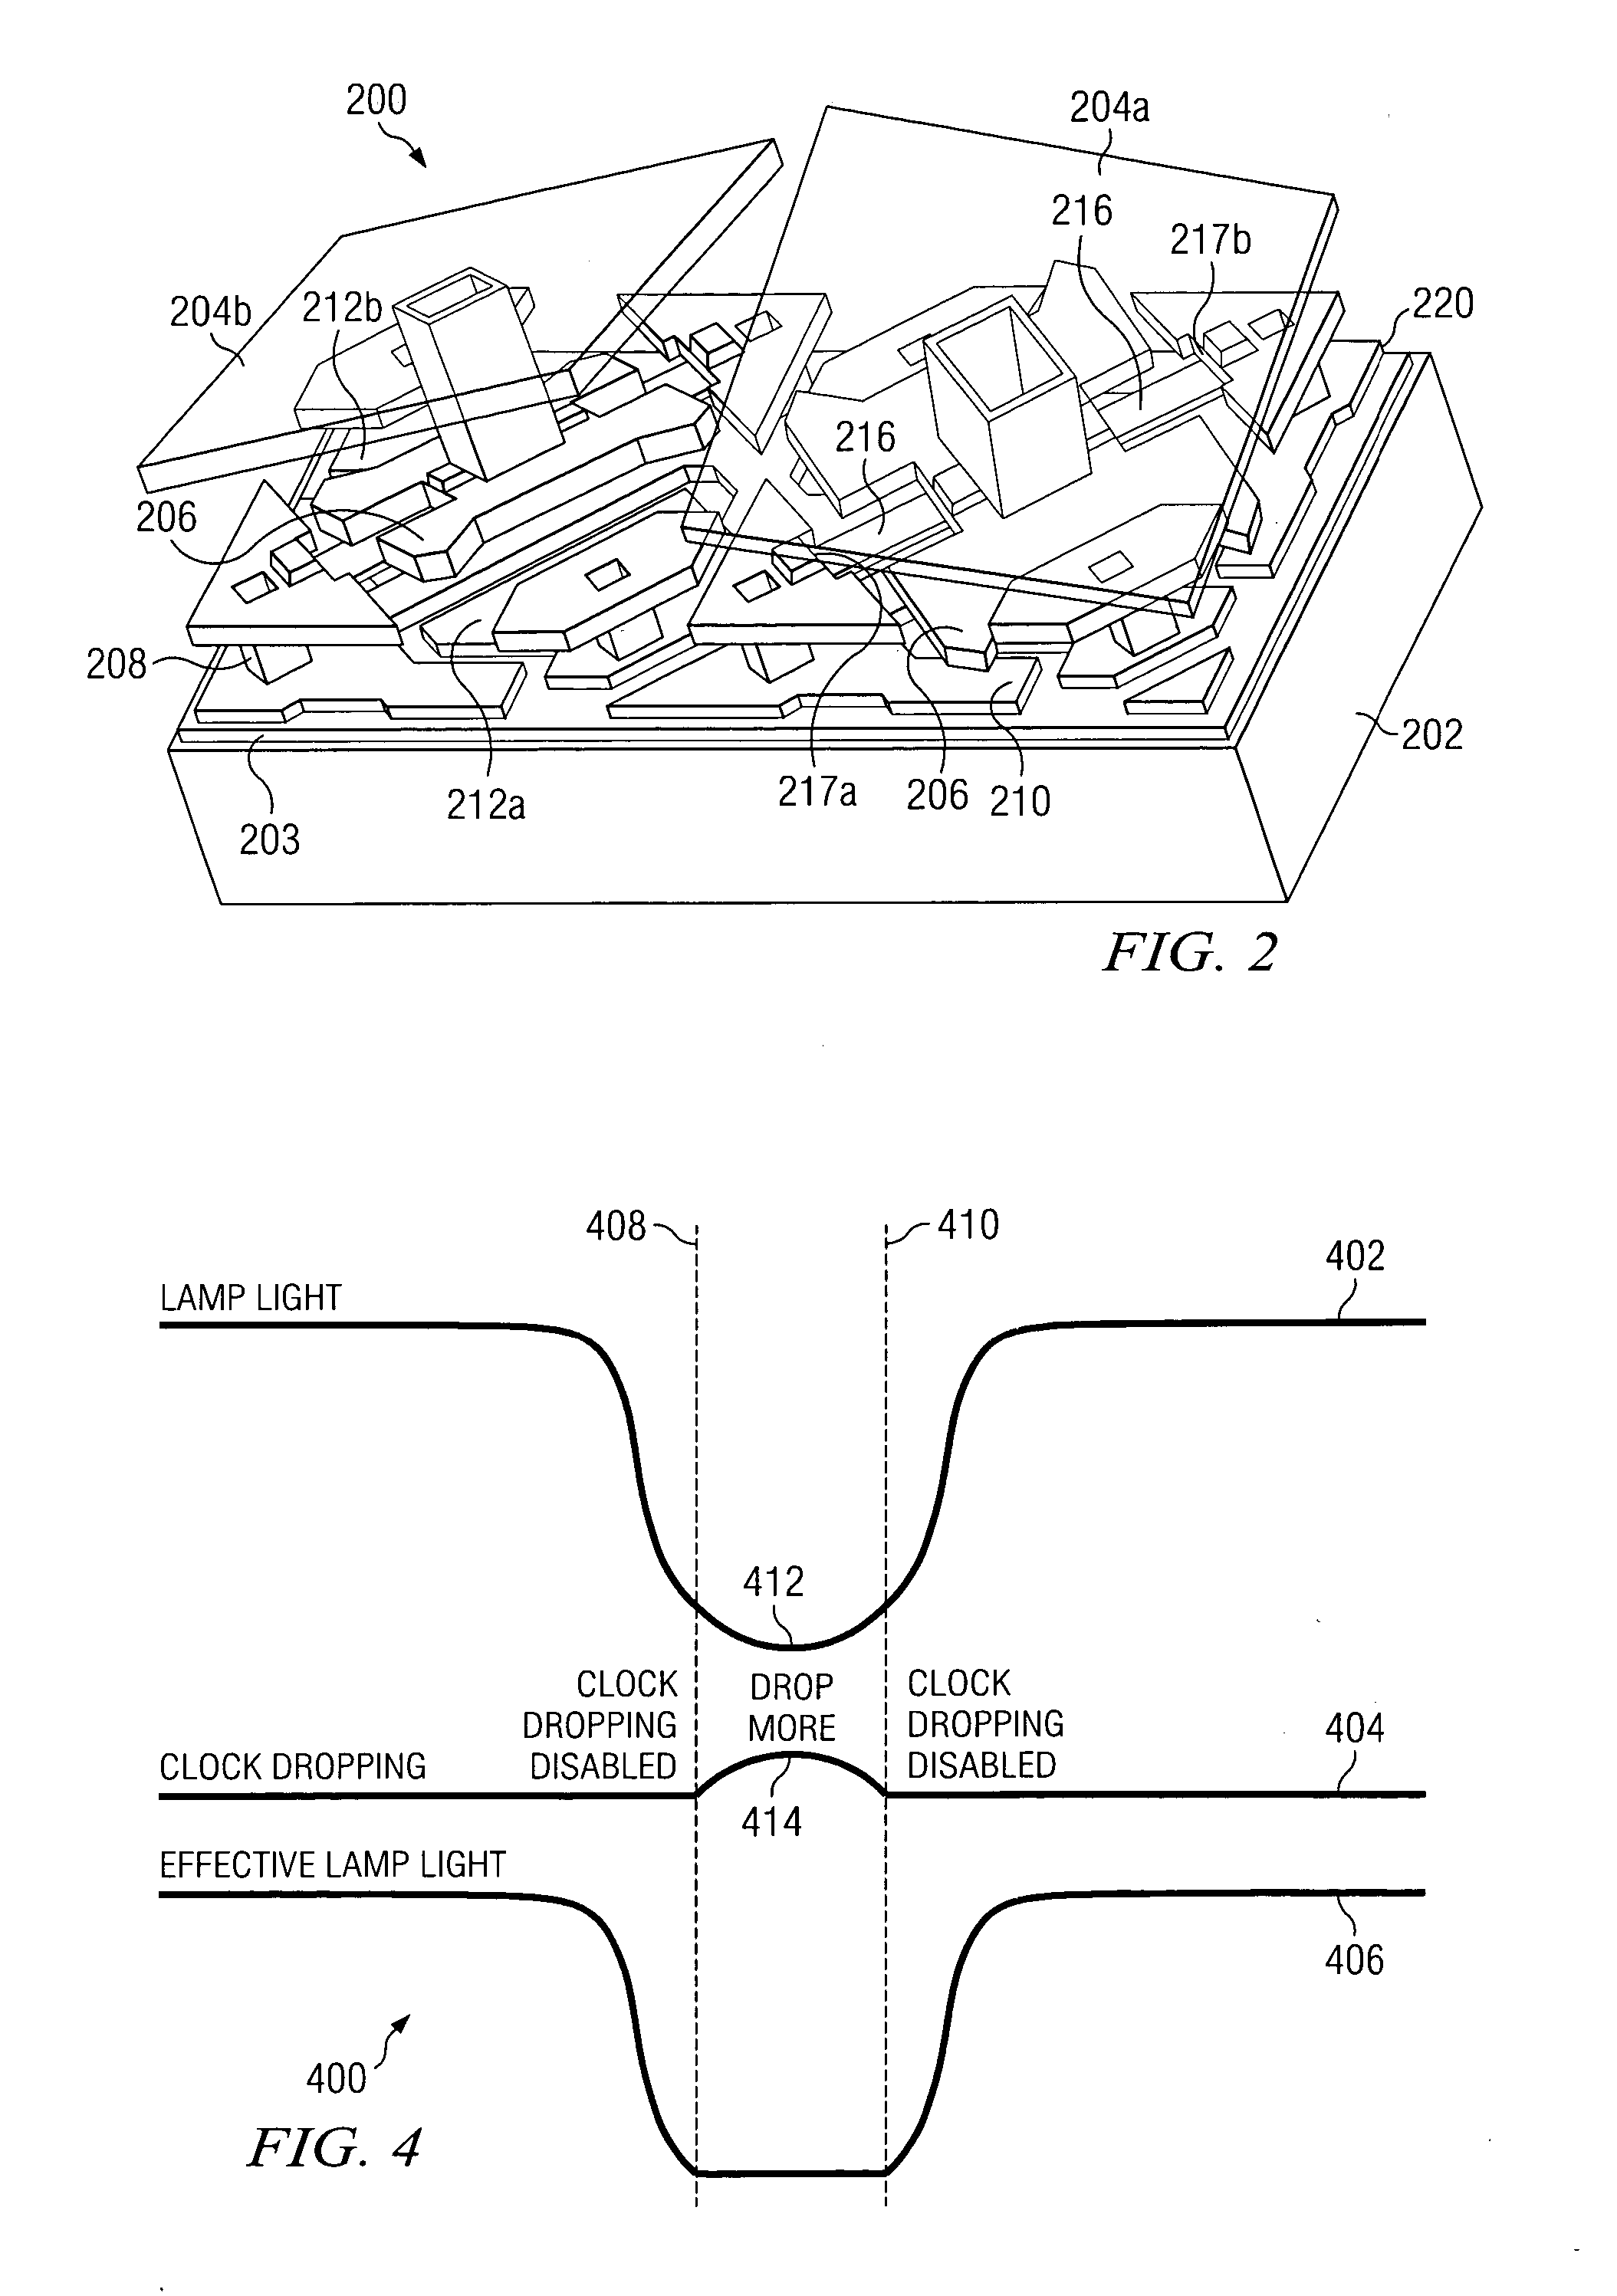 System and method for increasing bit-depth in a video display system using a pulsed lamp